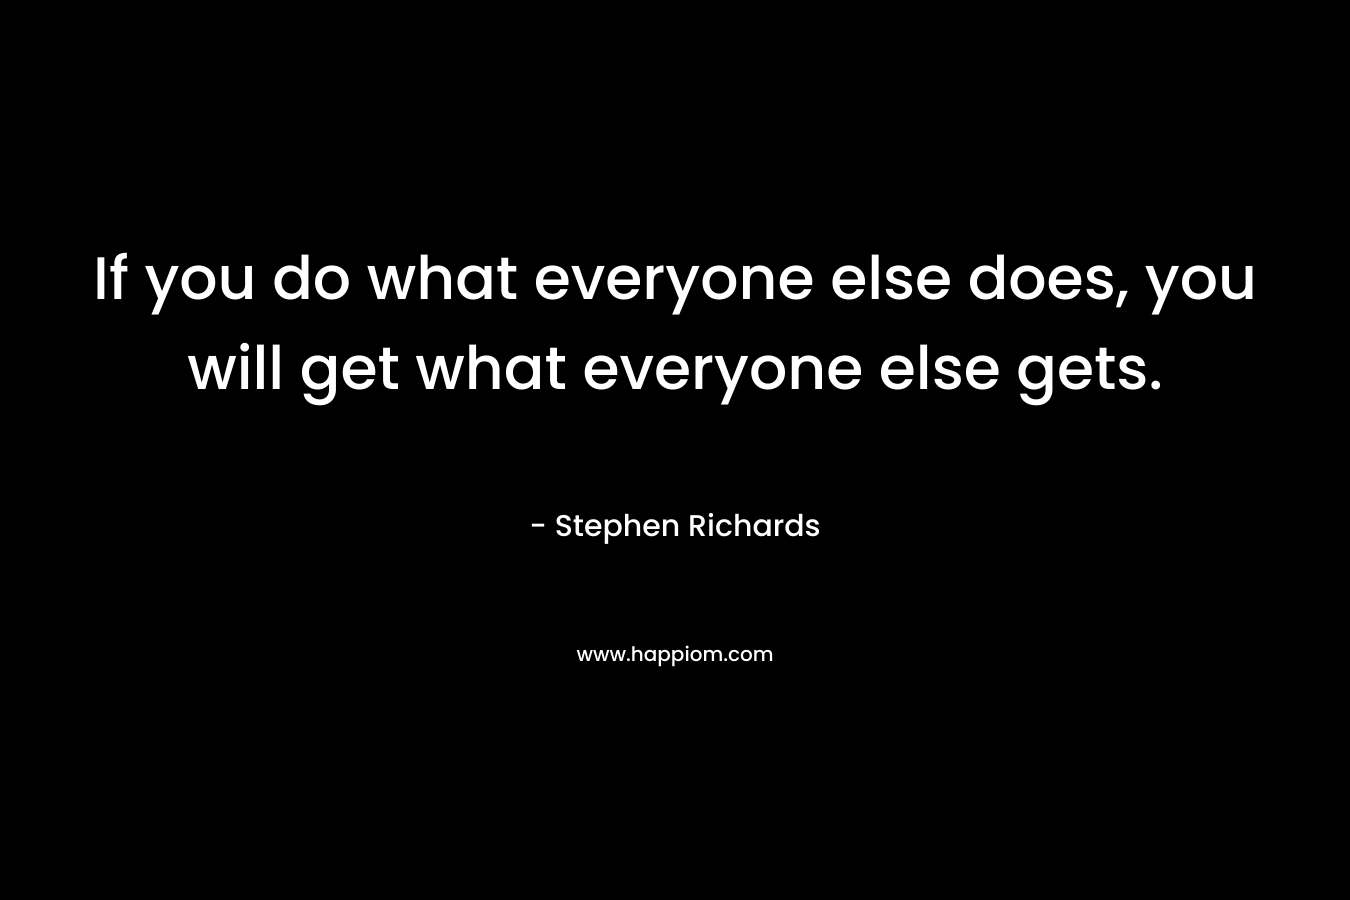 If you do what everyone else does, you will get what everyone else gets.